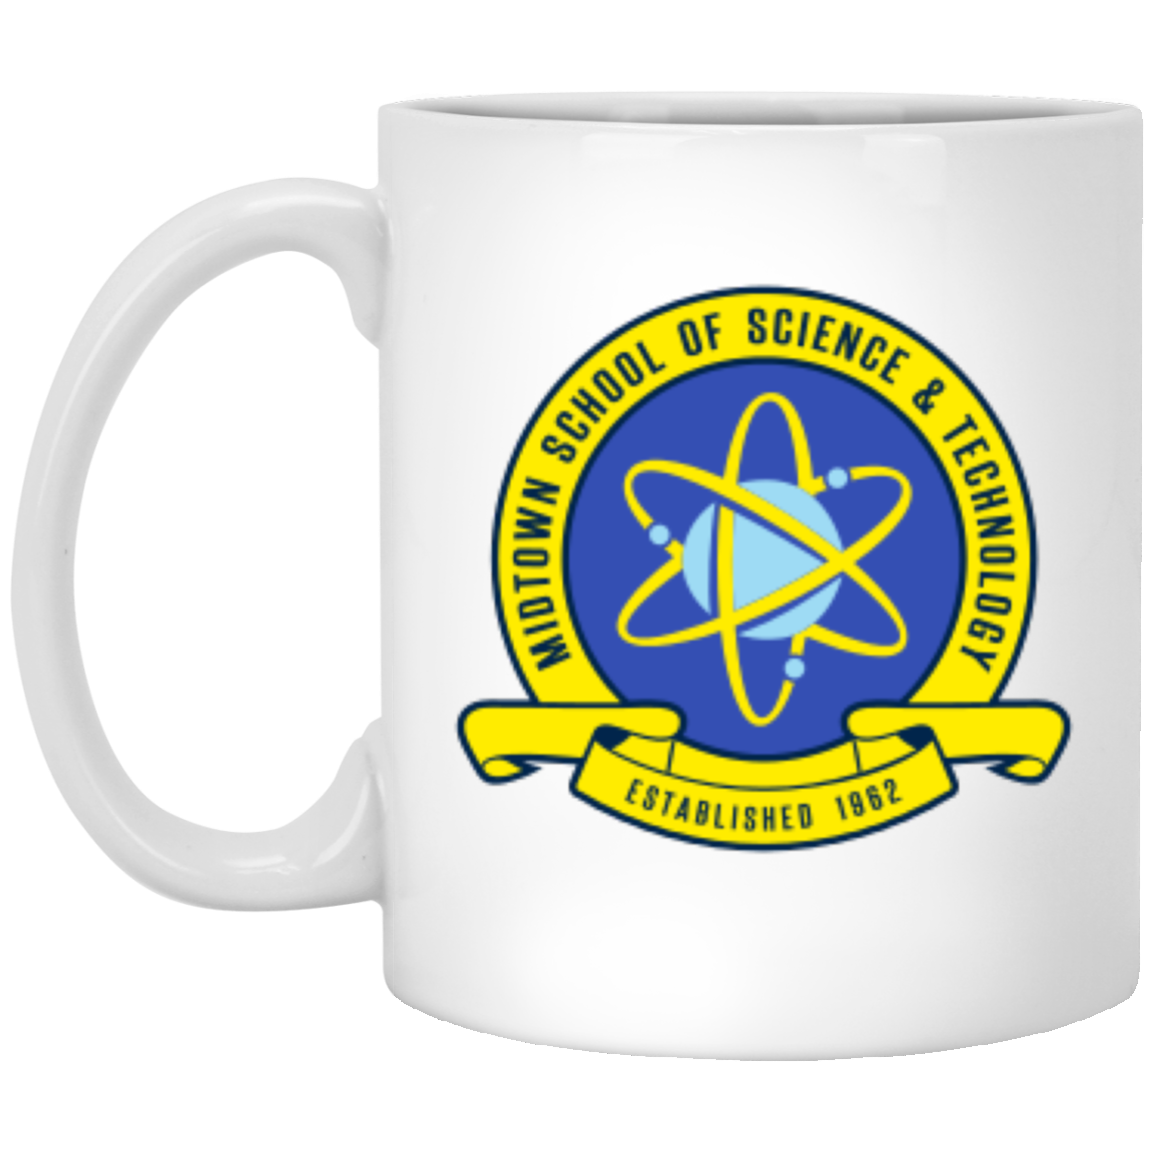 Midtown School of Science and Technology mugs